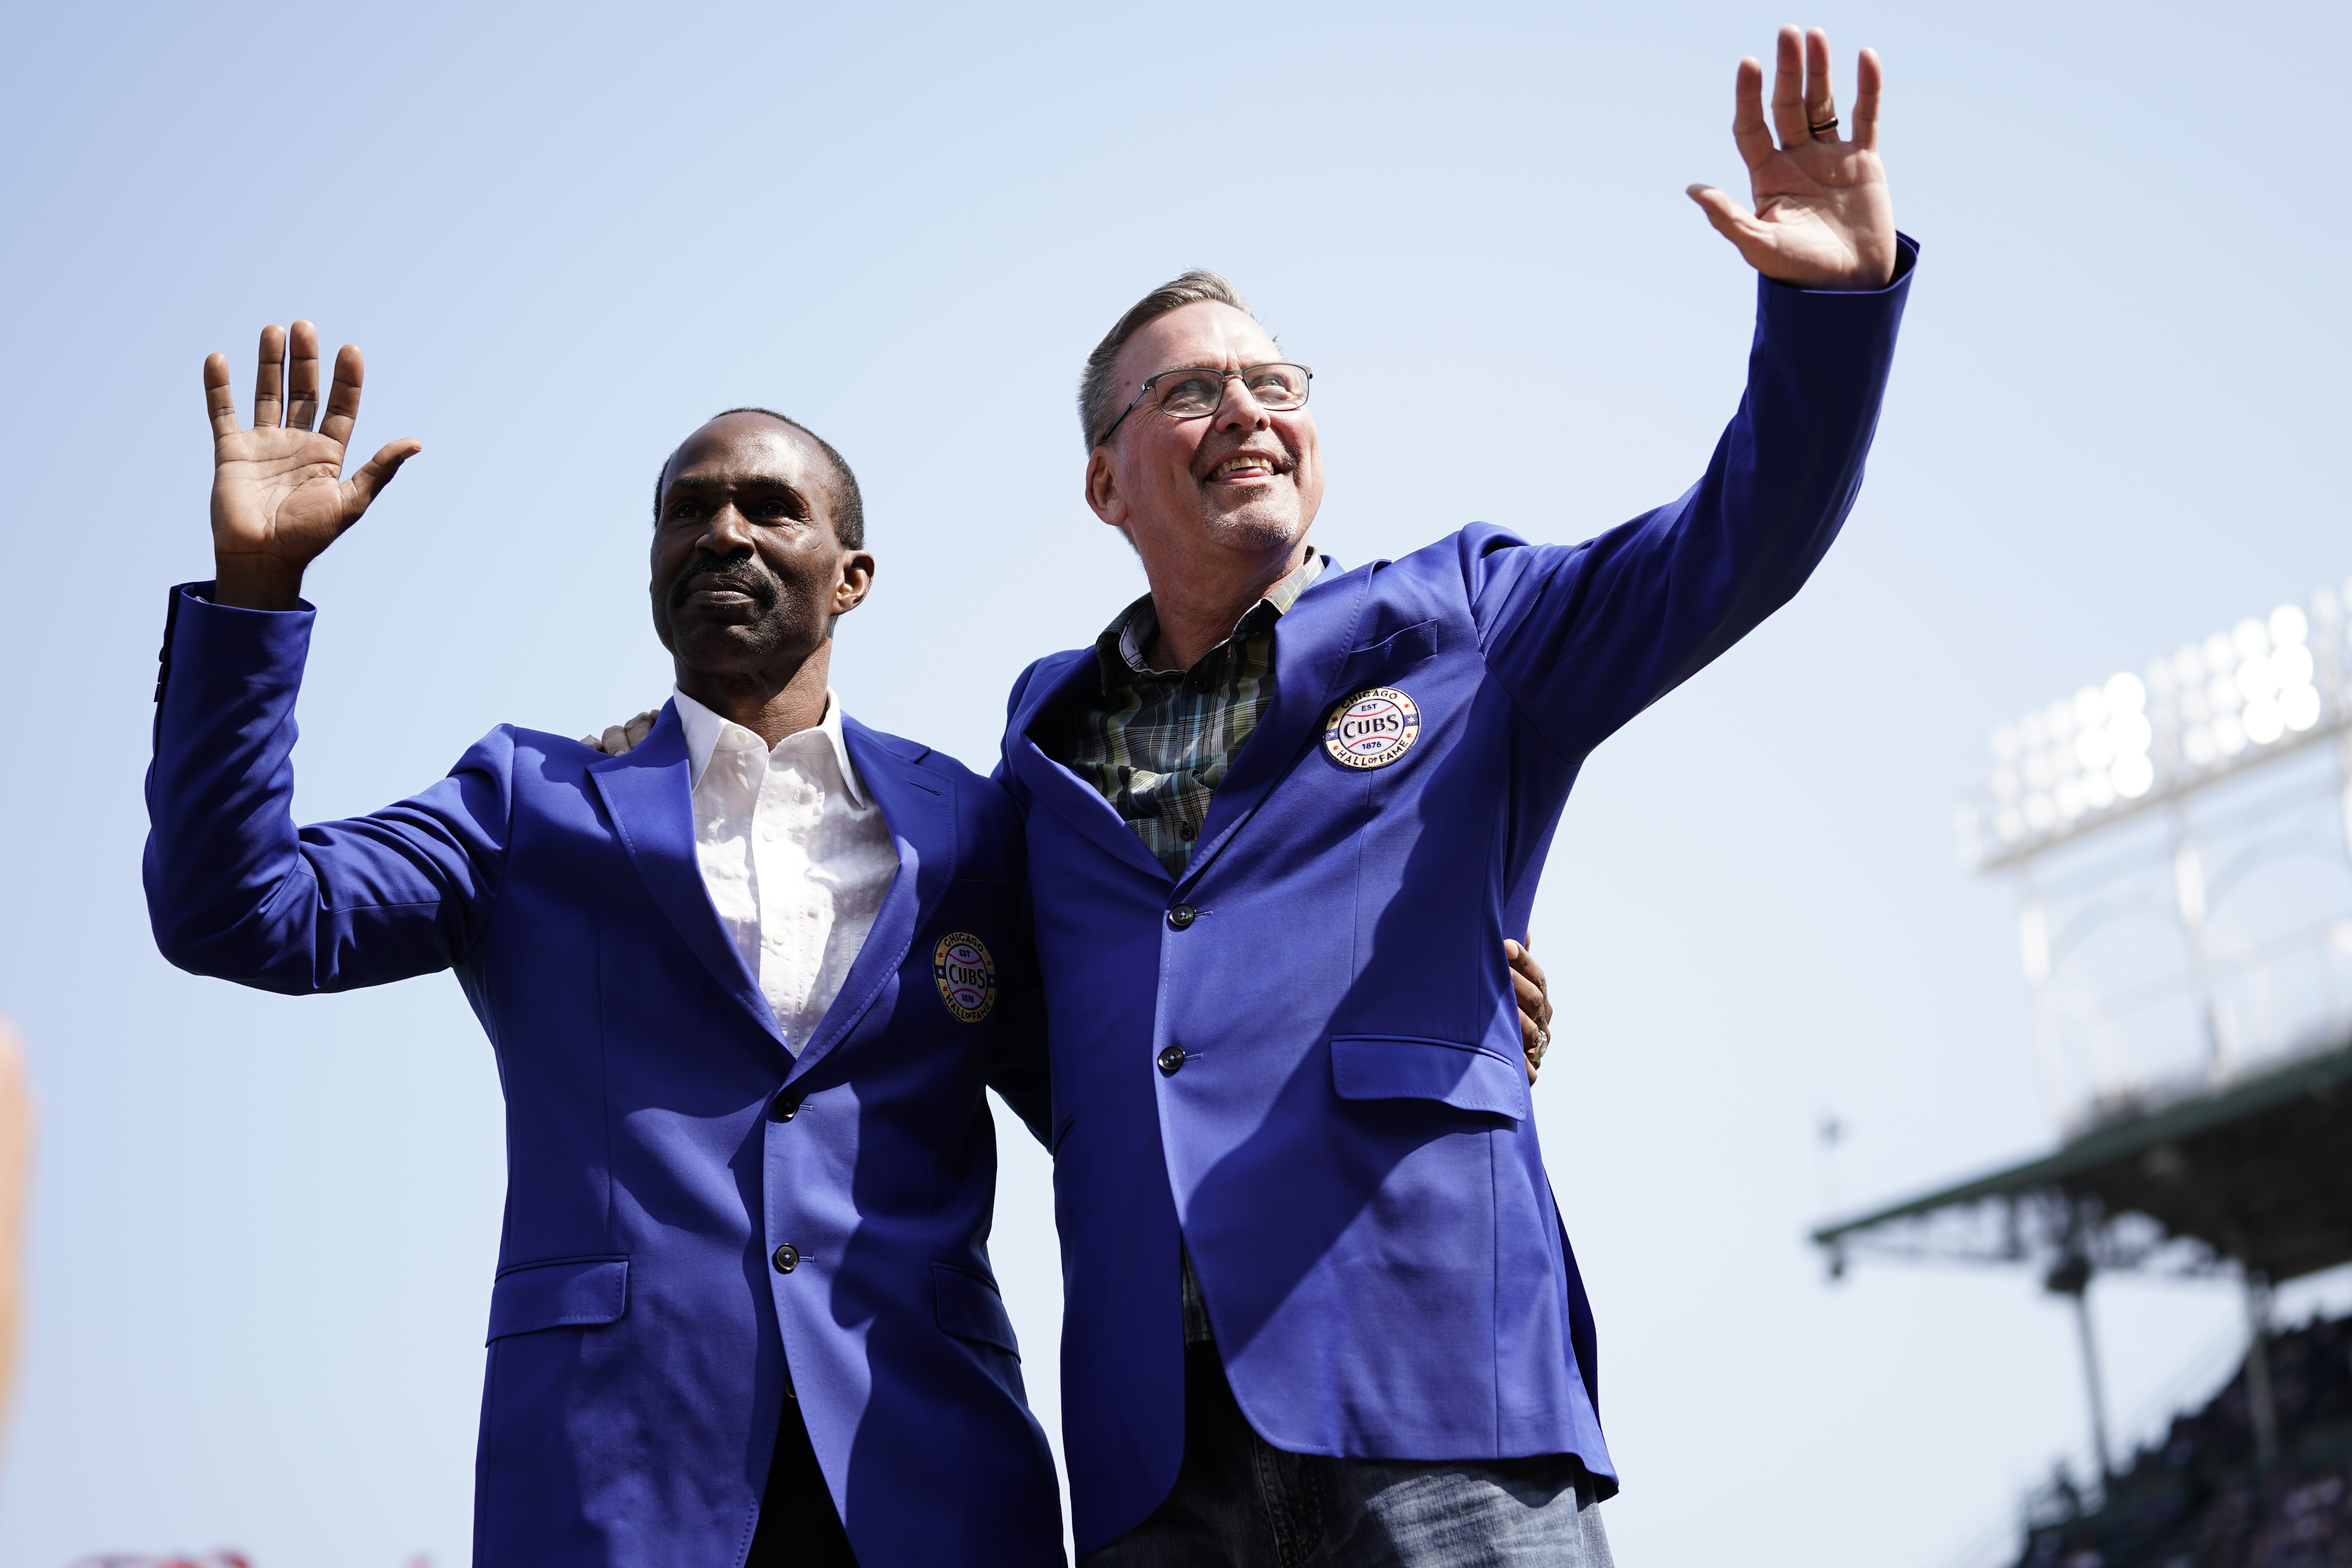 Chicago Cubs - Shawon Dunston and Shawon Dunston Jr. pose for a